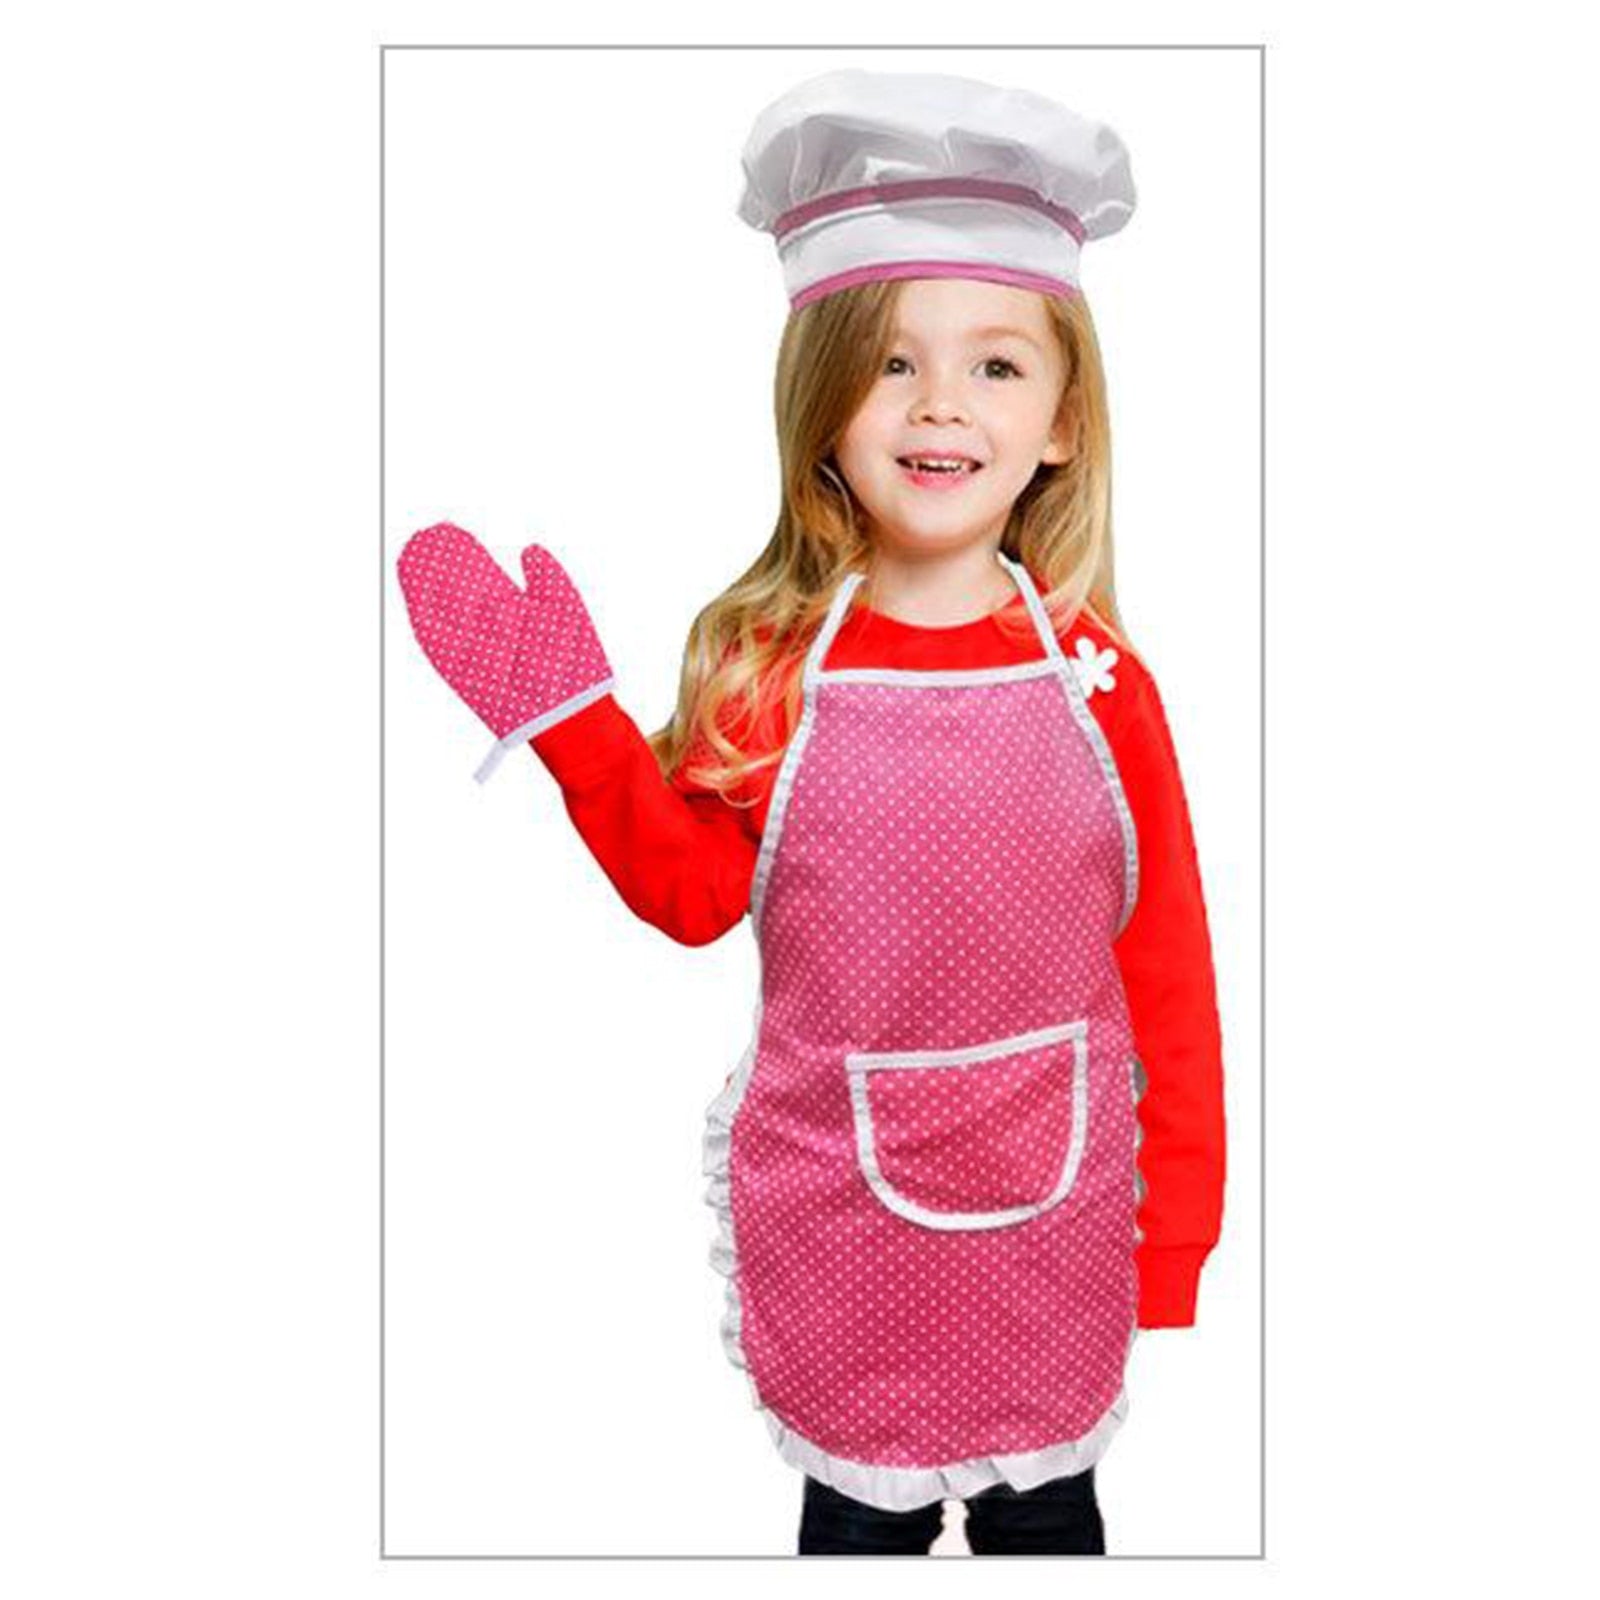 Kitchen Pretend Play Toys with Apron & Chef Hat  Oven Mitt   Hot Pad for Kids  Girls  Boys  Toddlers Accessories